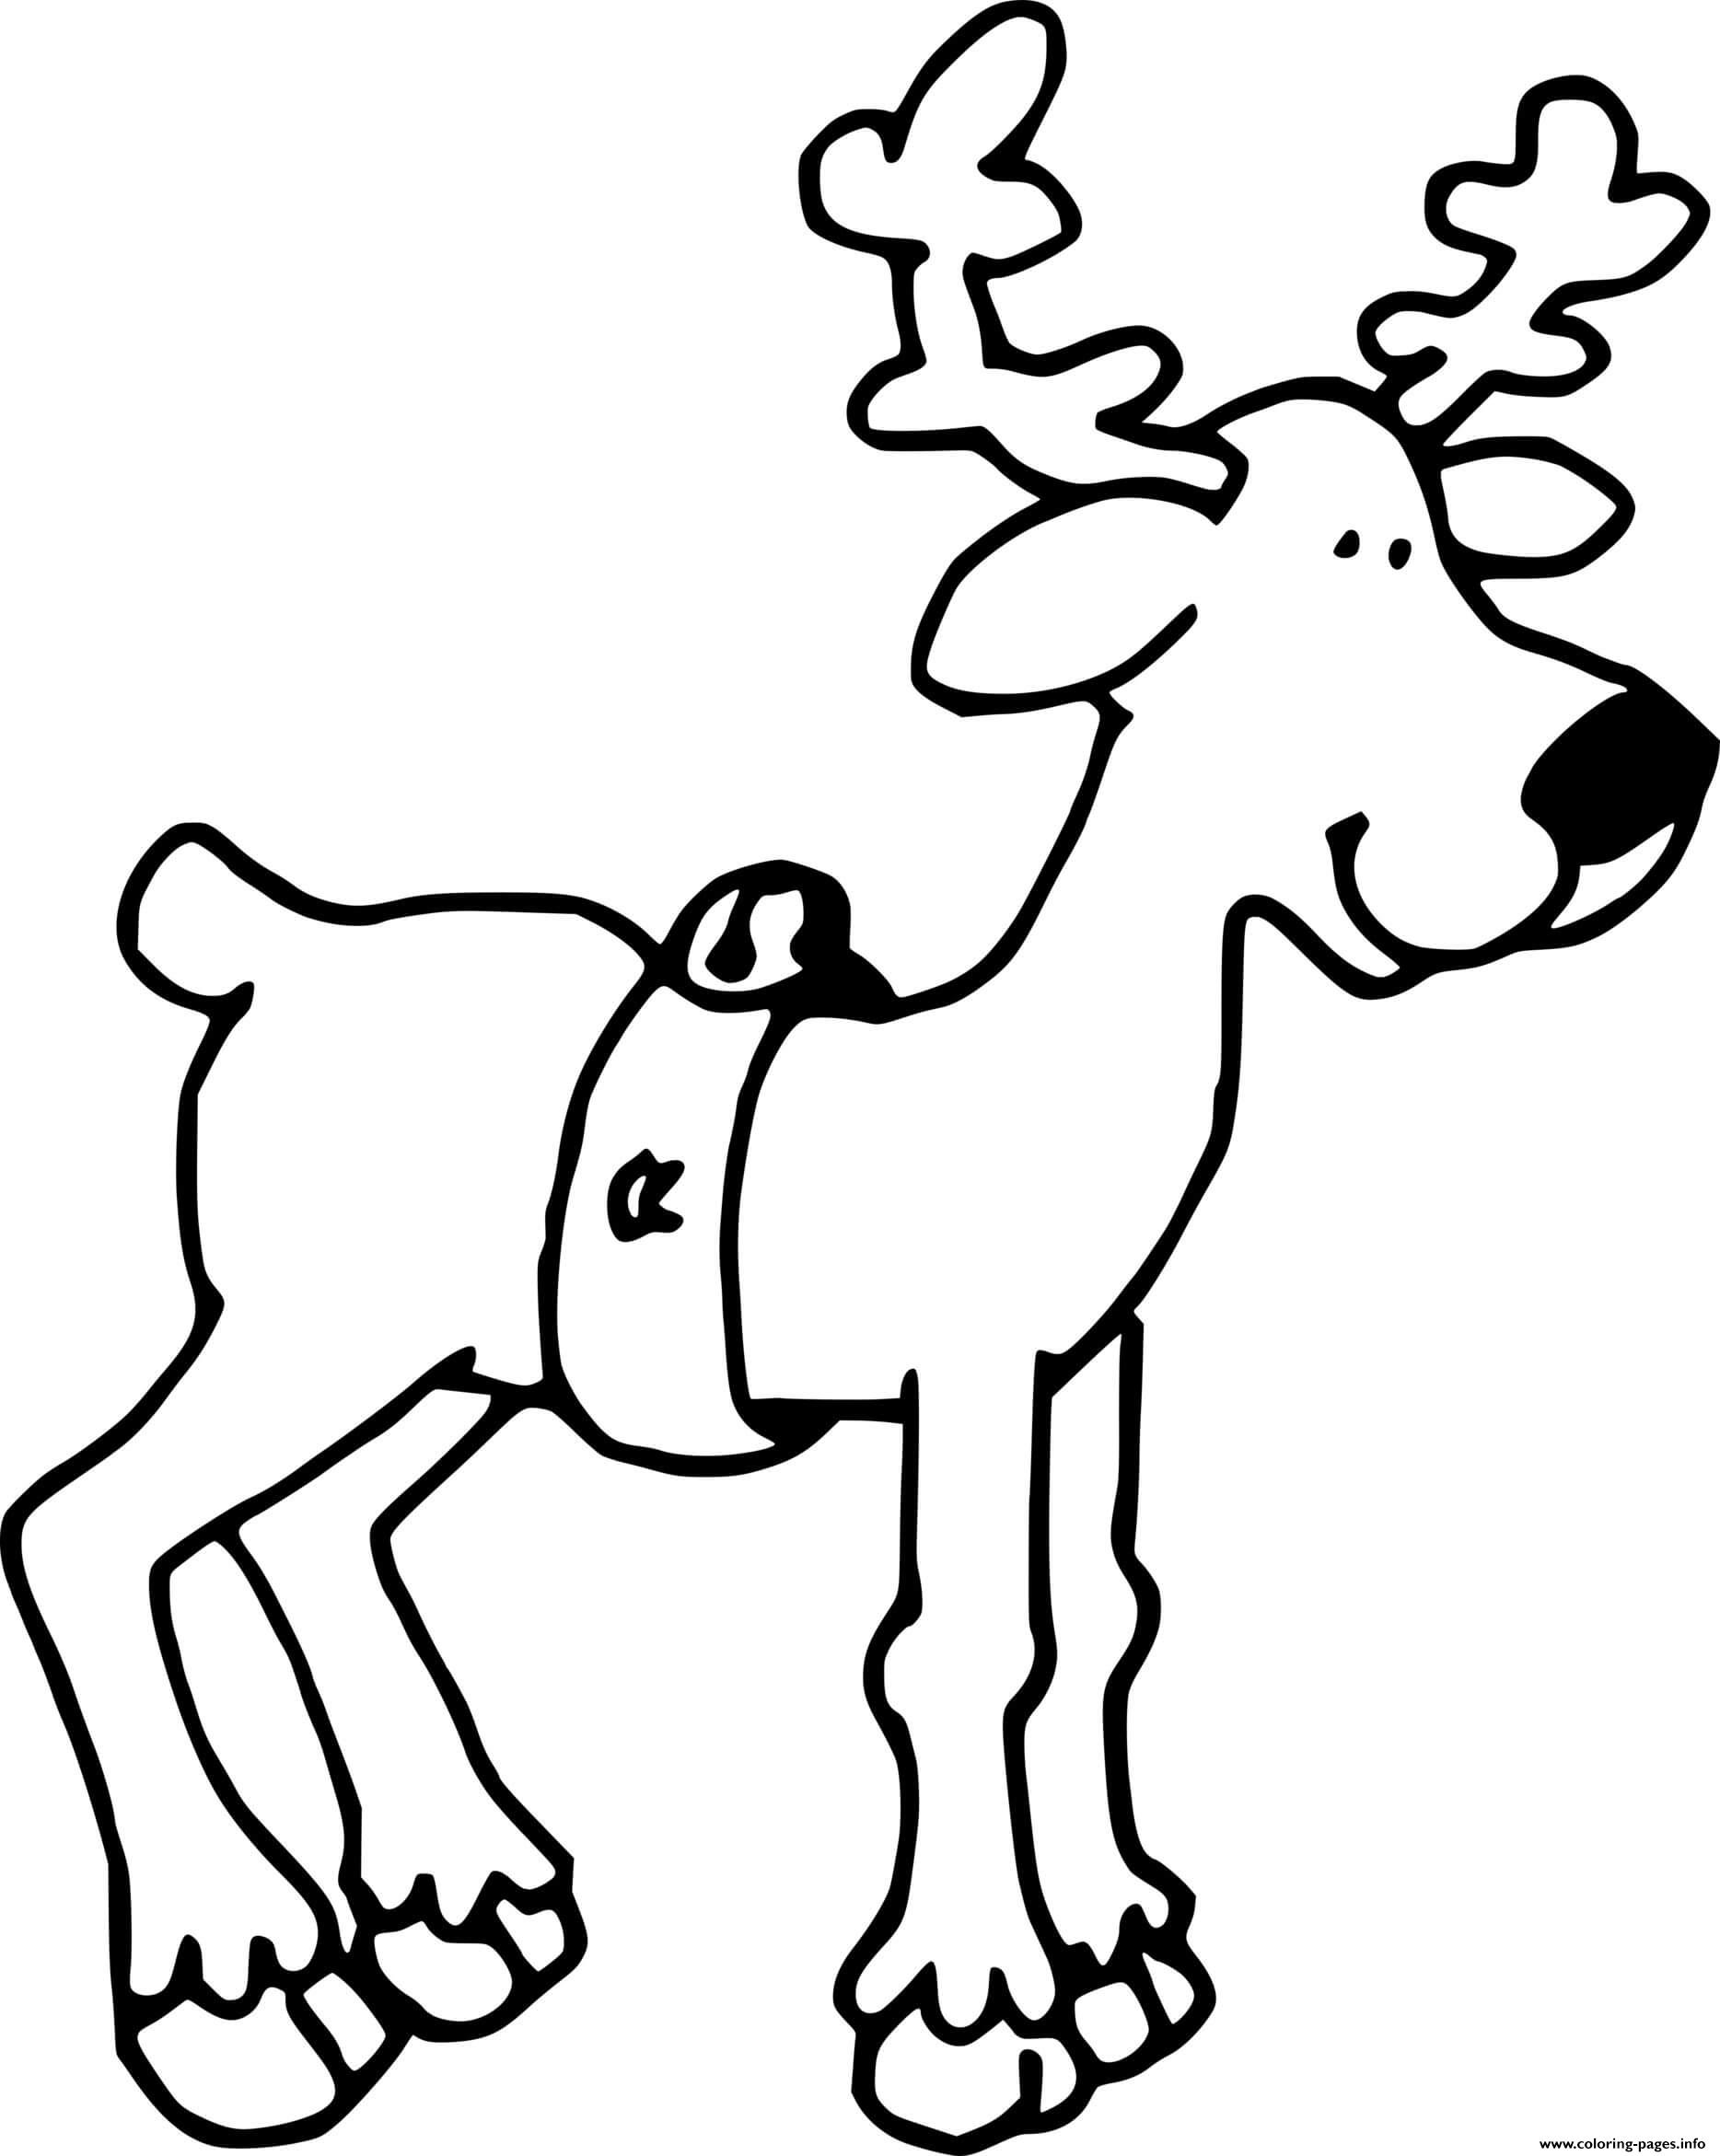 Reindeer Looks Like A Dog coloring